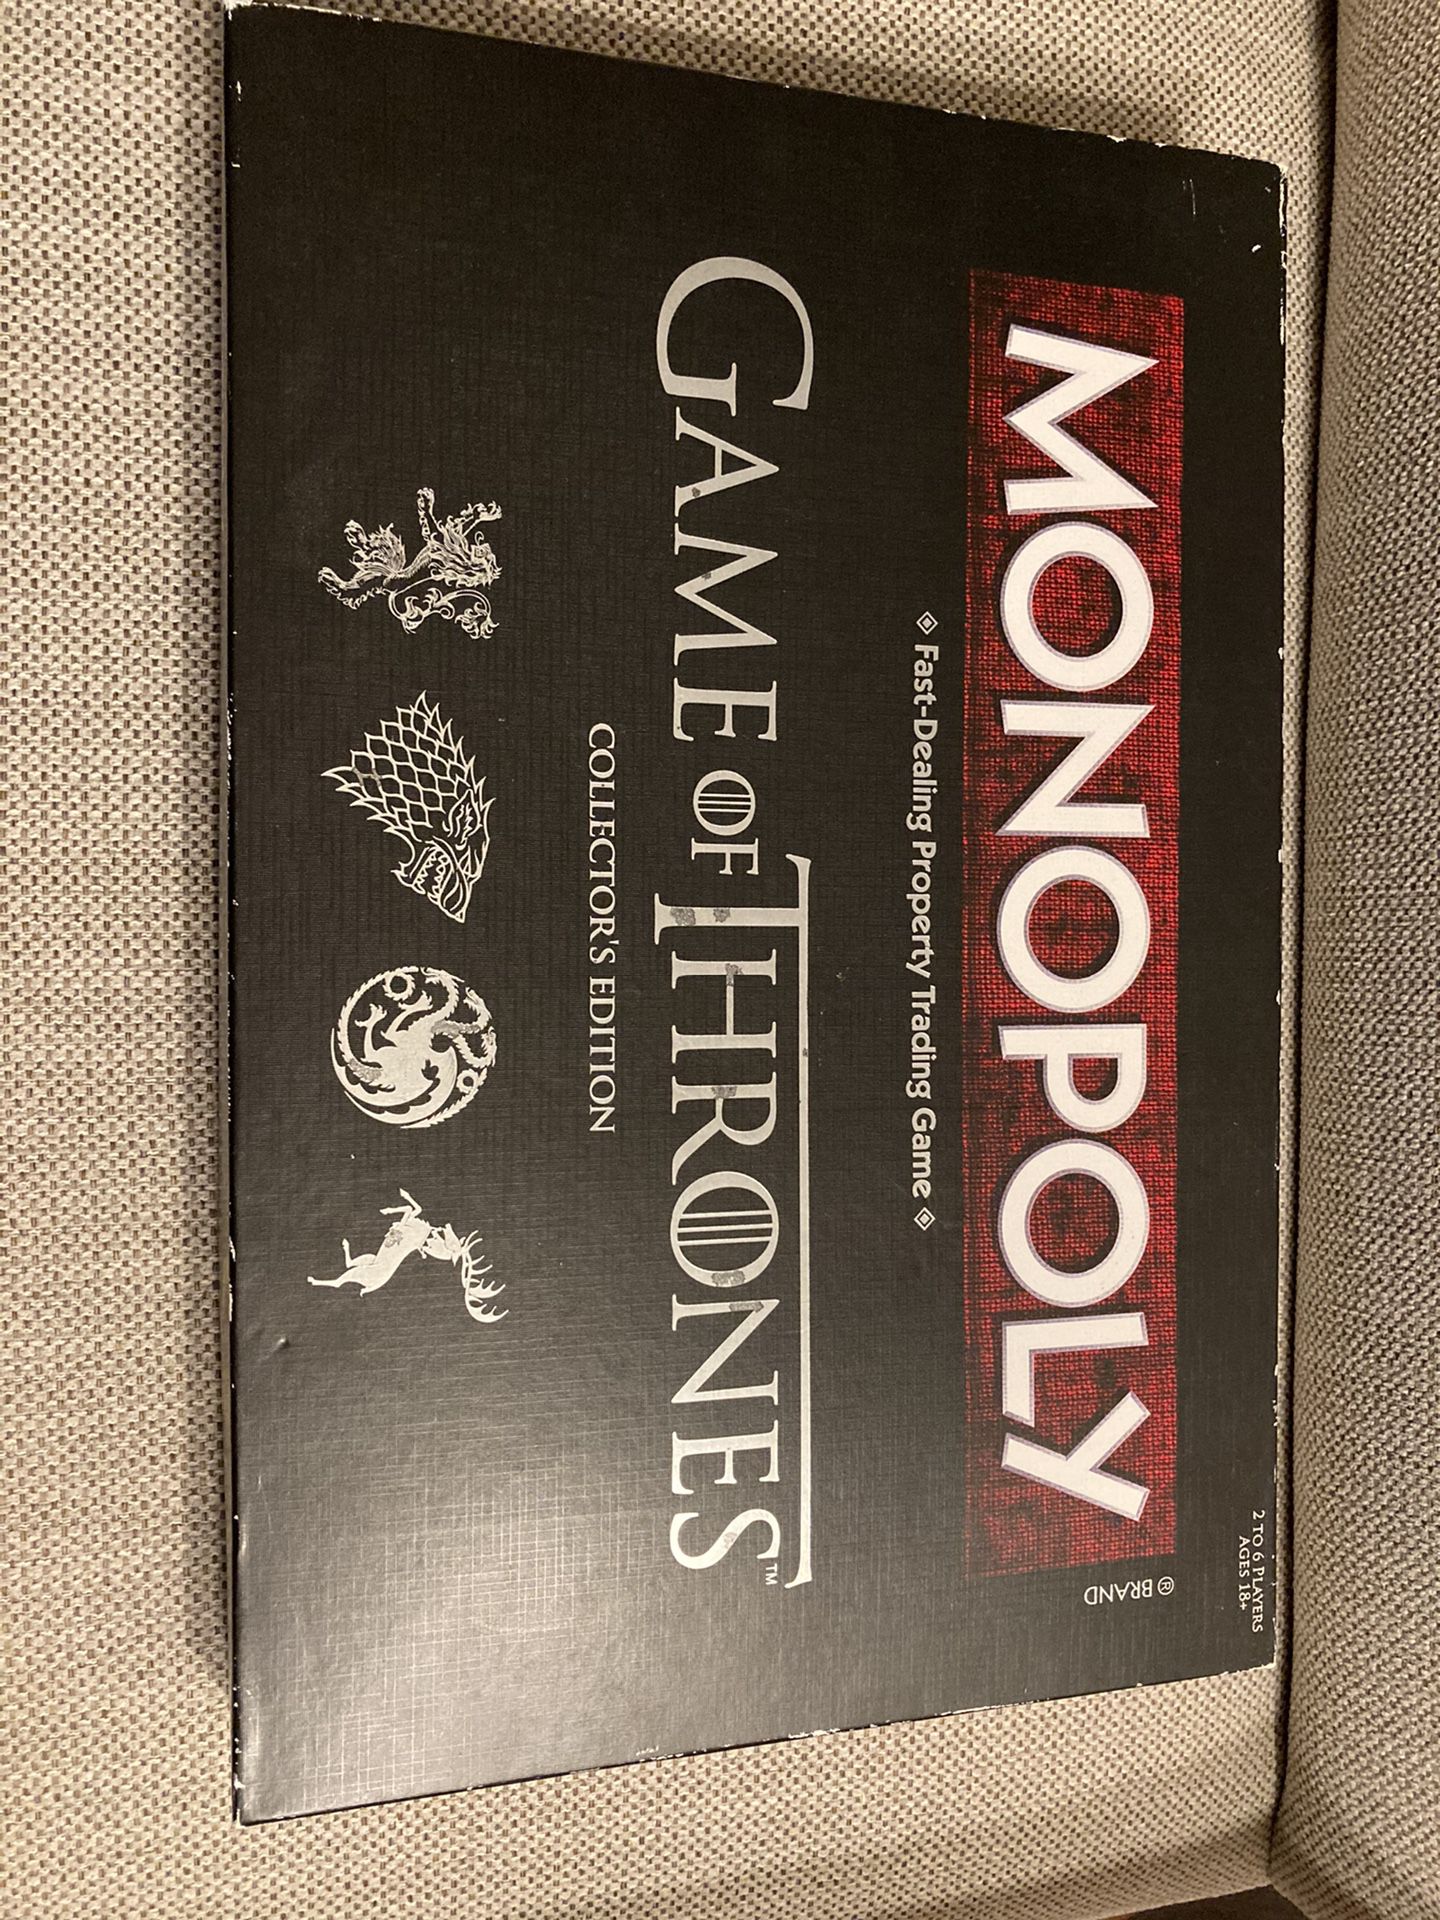 Board game: Game of Thrones monopoly (collectors edition)